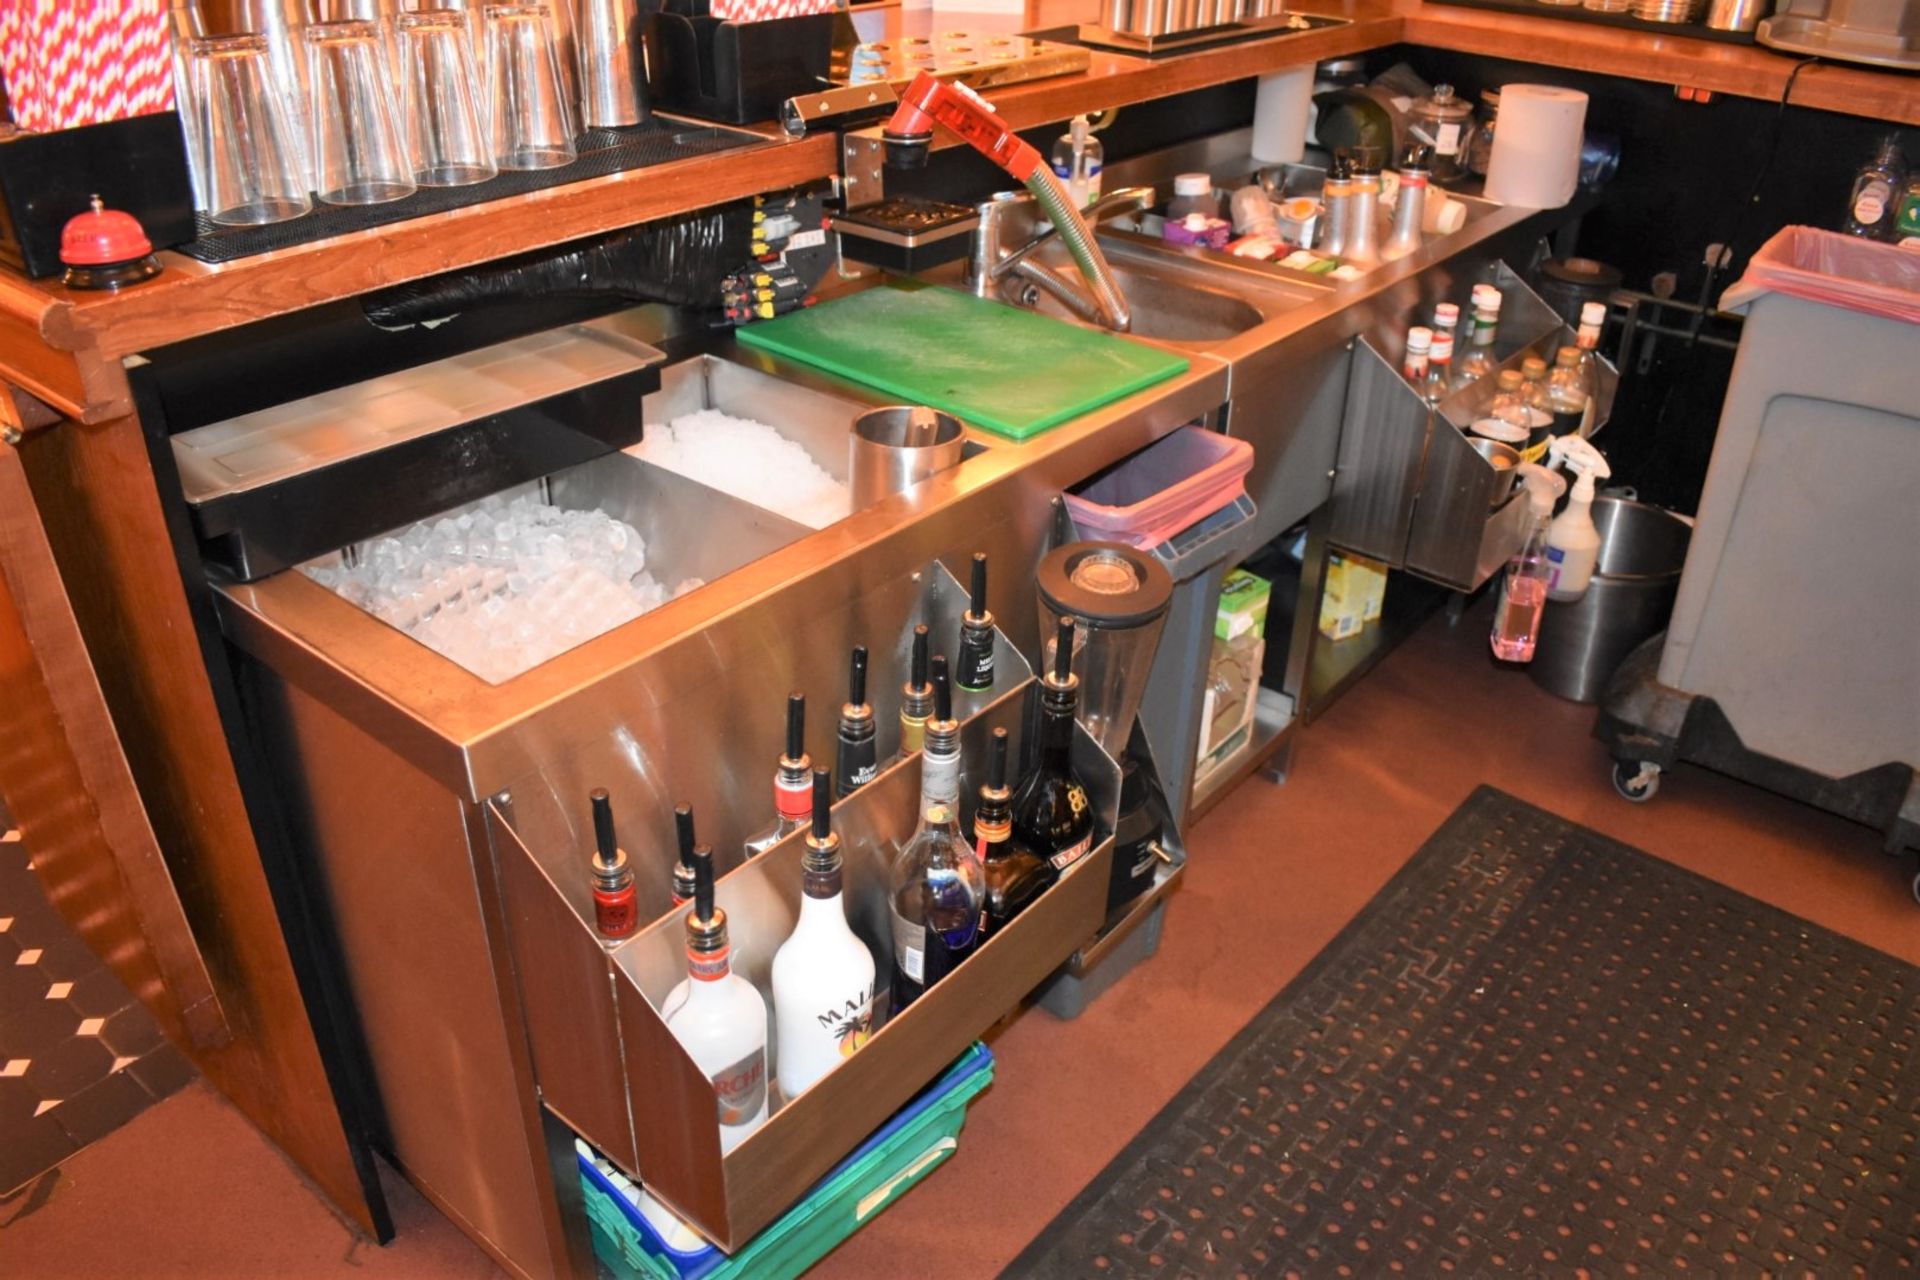 2 x Stainless Steel Backbar Drink Preparation Units With 2 x Ice Wells, 1 x Basin With Mixer Tap, - Image 9 of 10